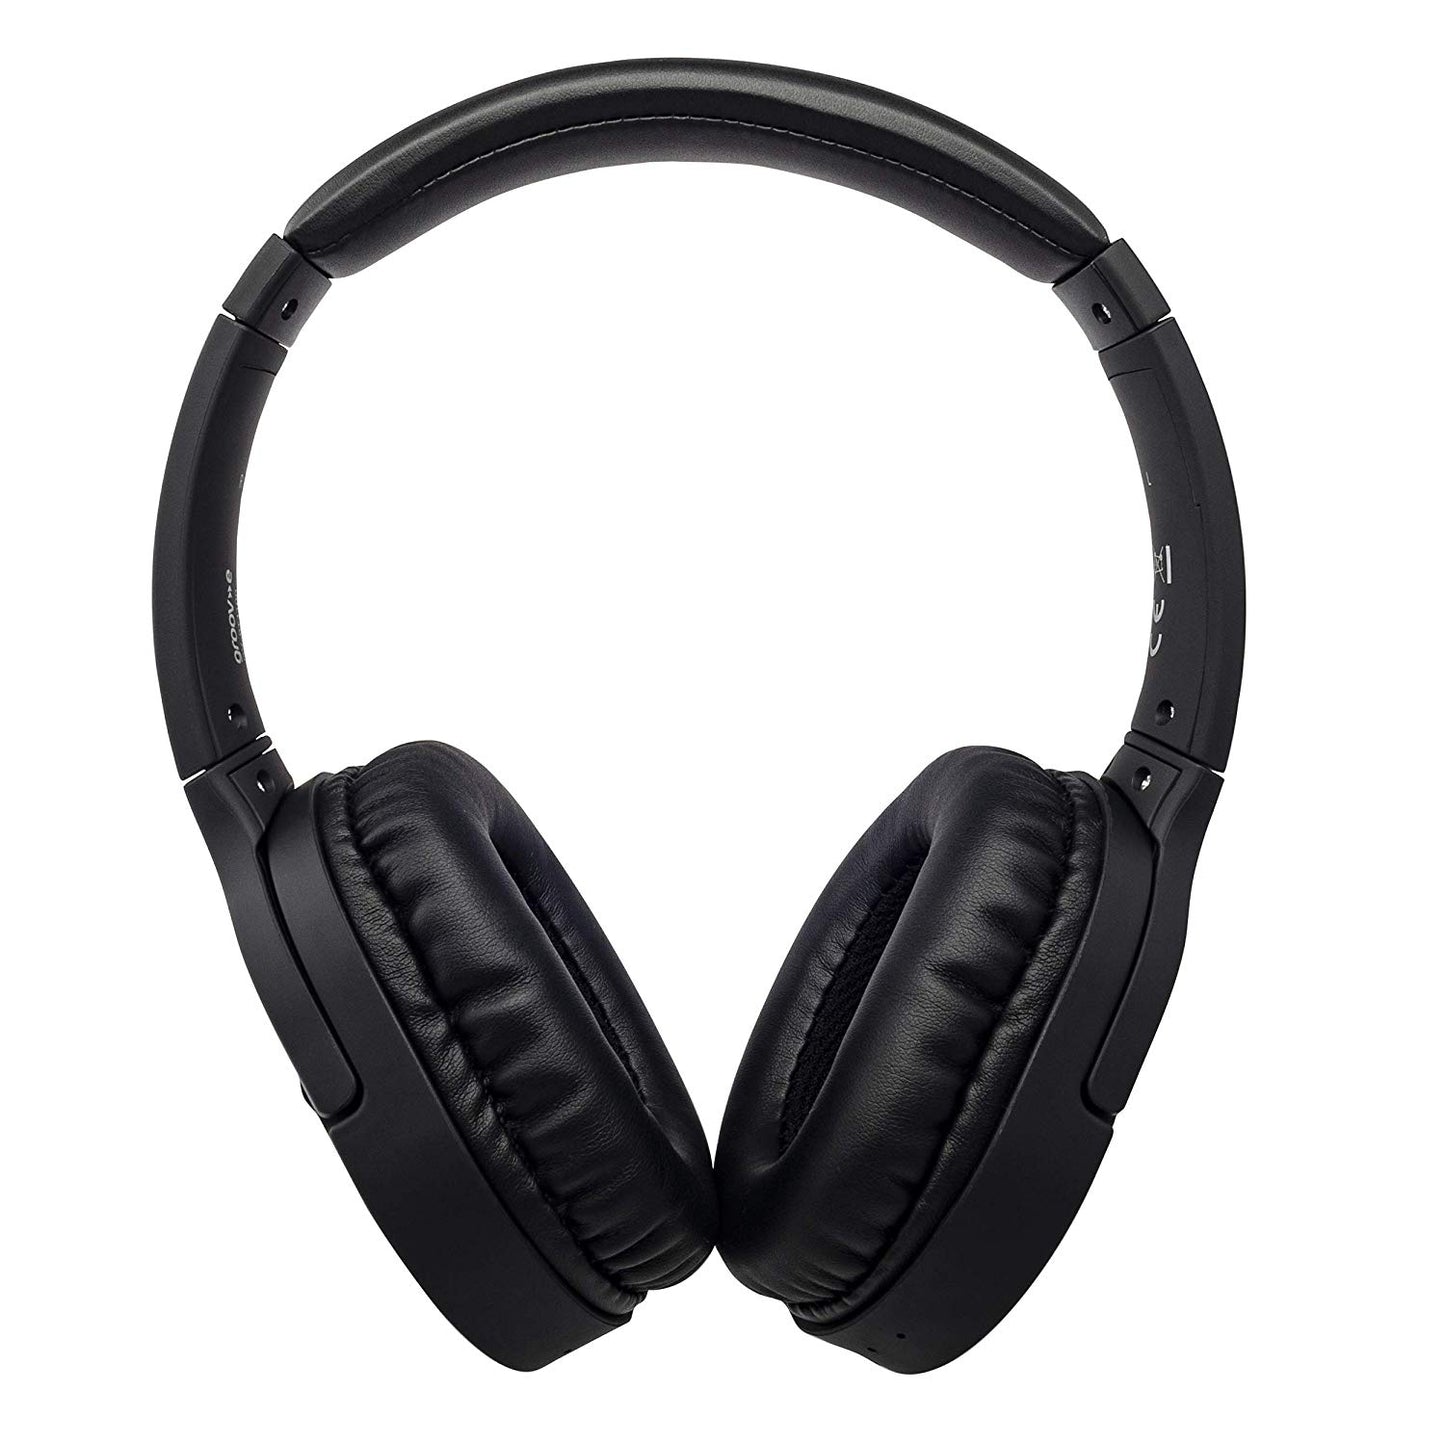 Groov-e Zen Wireless Headphones with Active Noise Cancelling